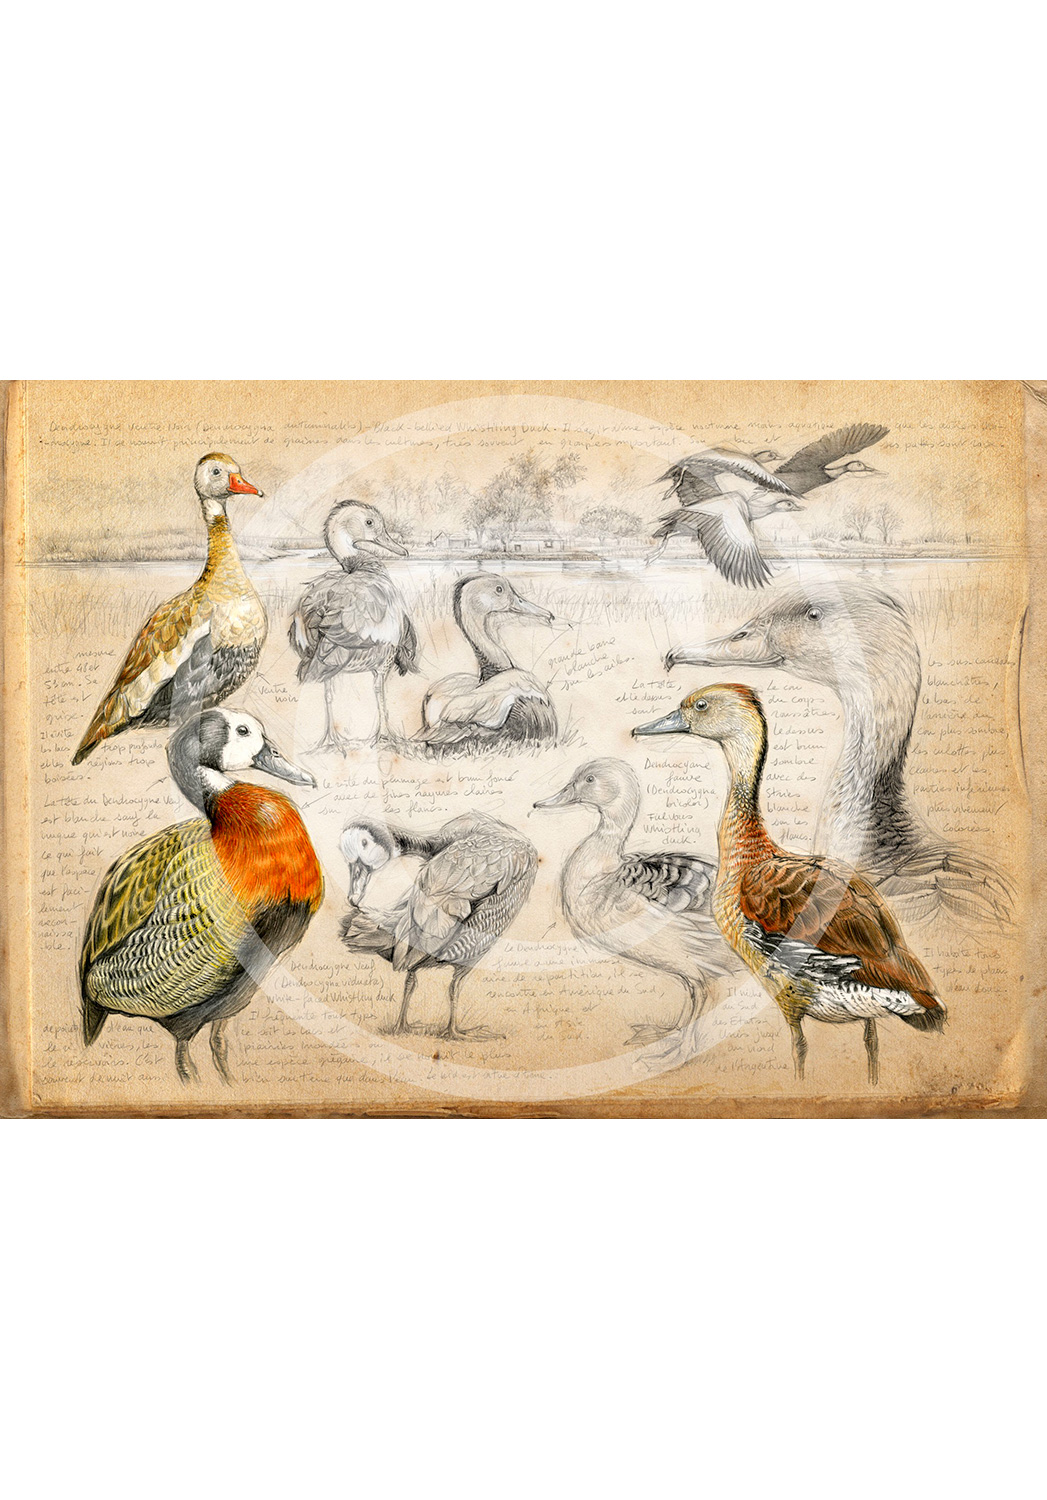 Marcello-art: Prints on canvas 237 - Whistling Duck